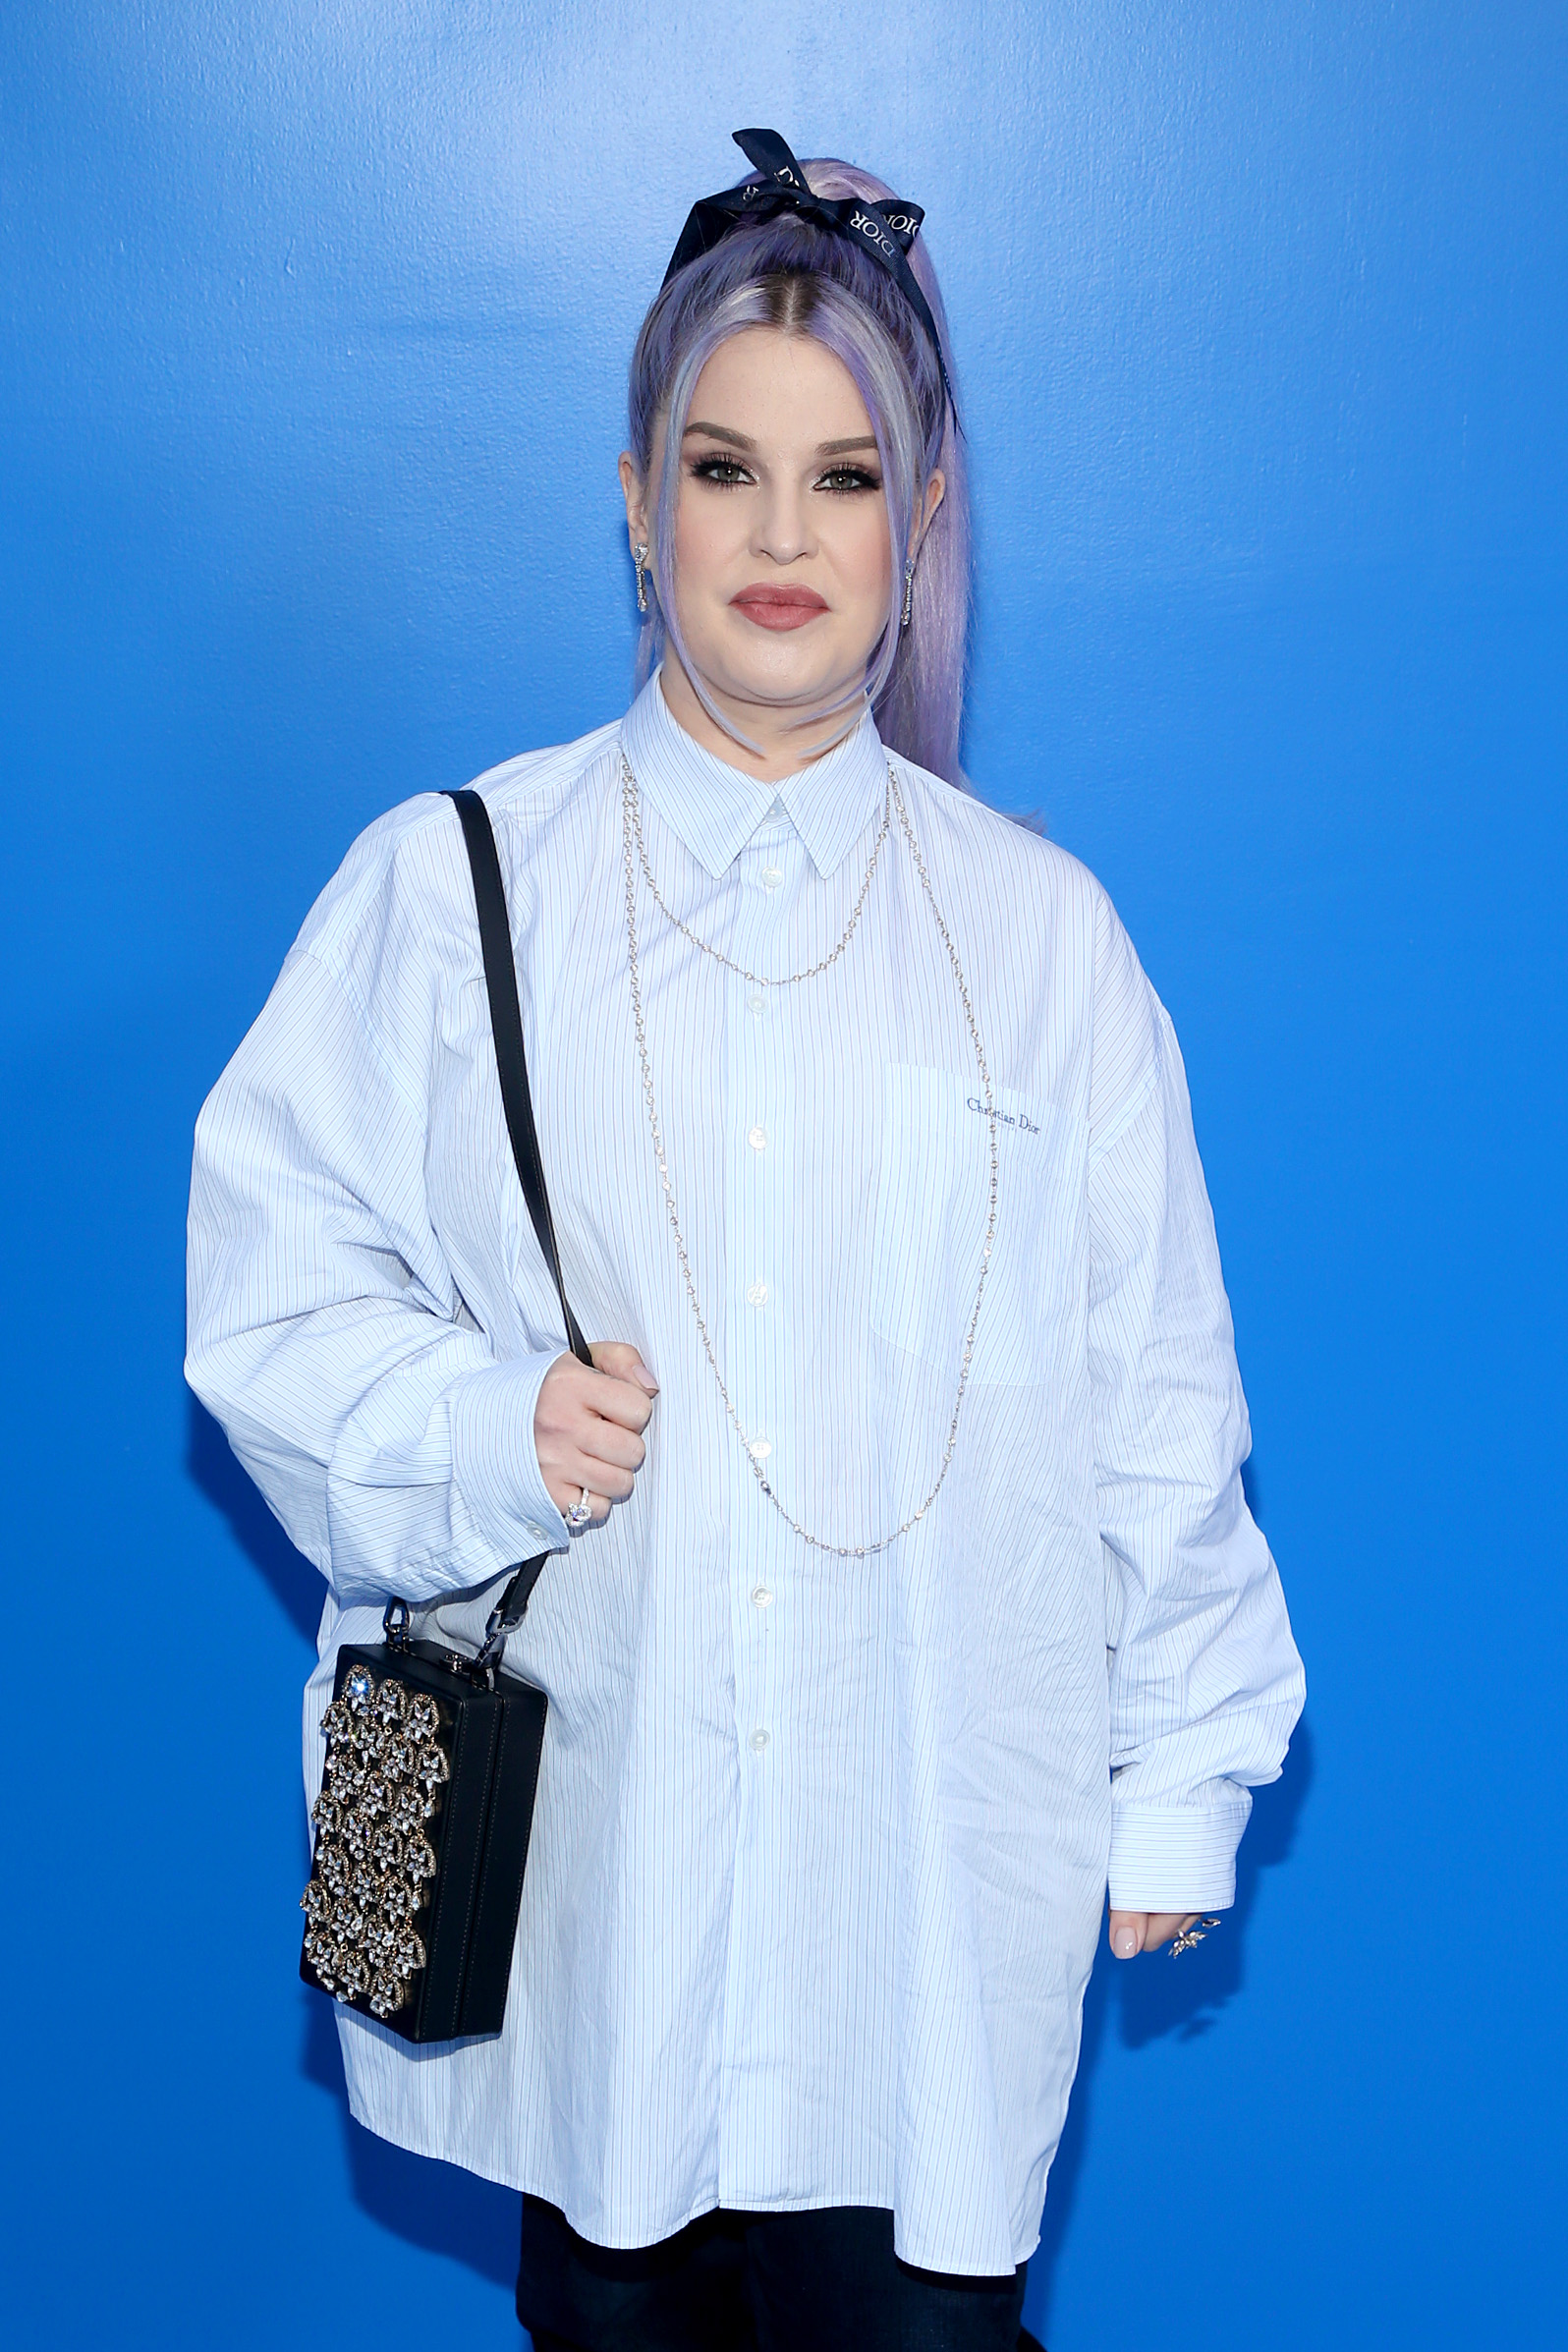 Kelly Osbourne at the Dior Men's Spring/Summer 2023 Collection event on May 19, 2022, in Los Angeles, California | Source: Getty Images